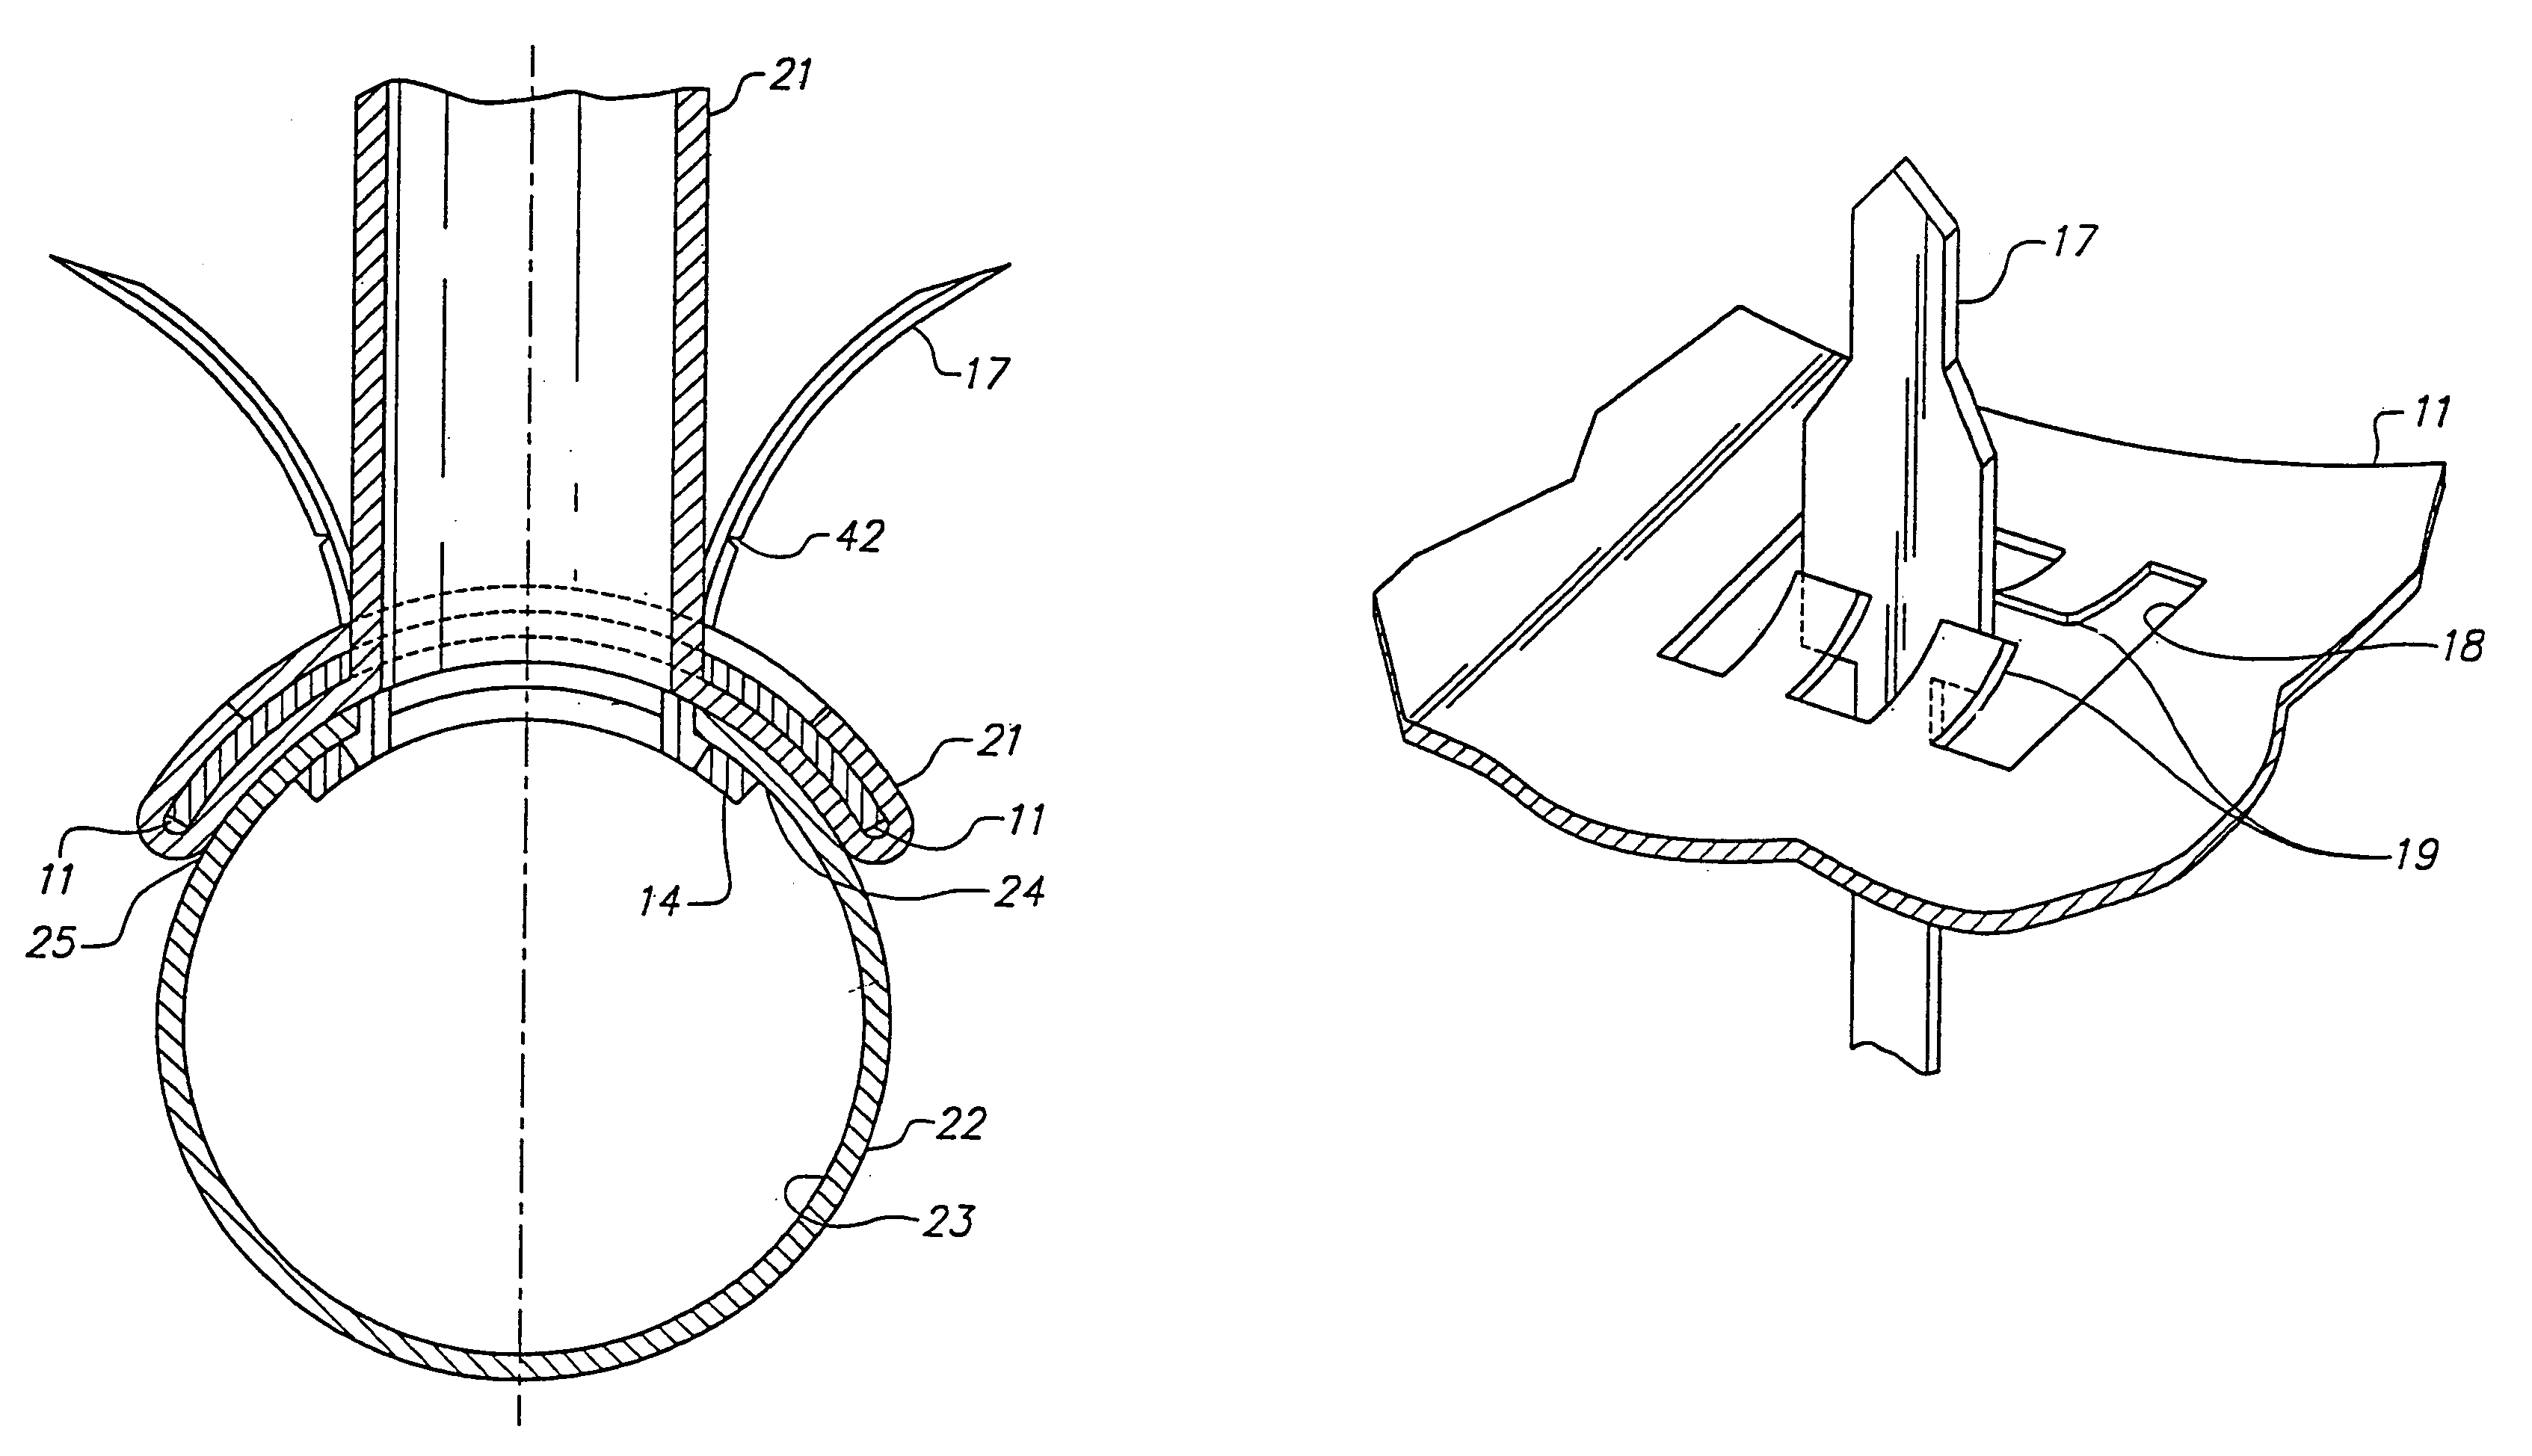 Anastomosis device having at least one frangible member